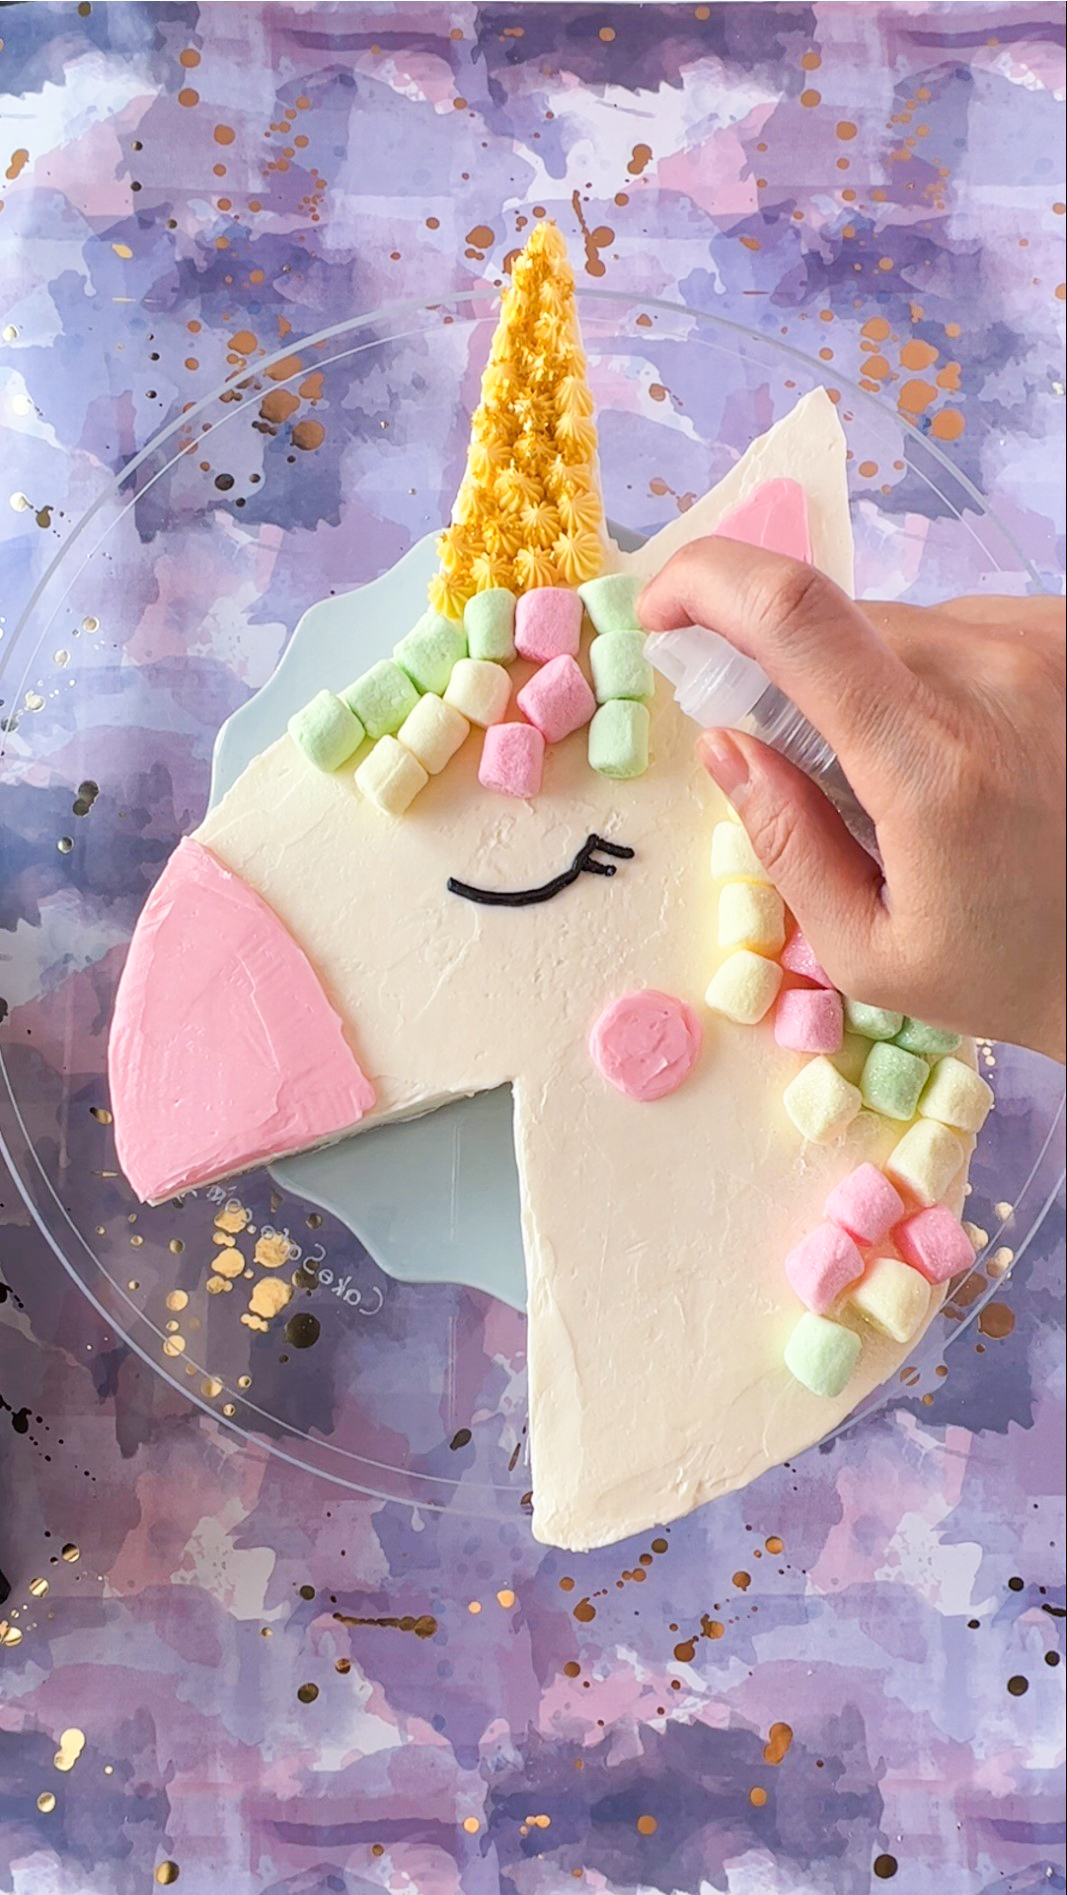 Buy Unicorn Cake Online at Low Prices - Exotica Flower